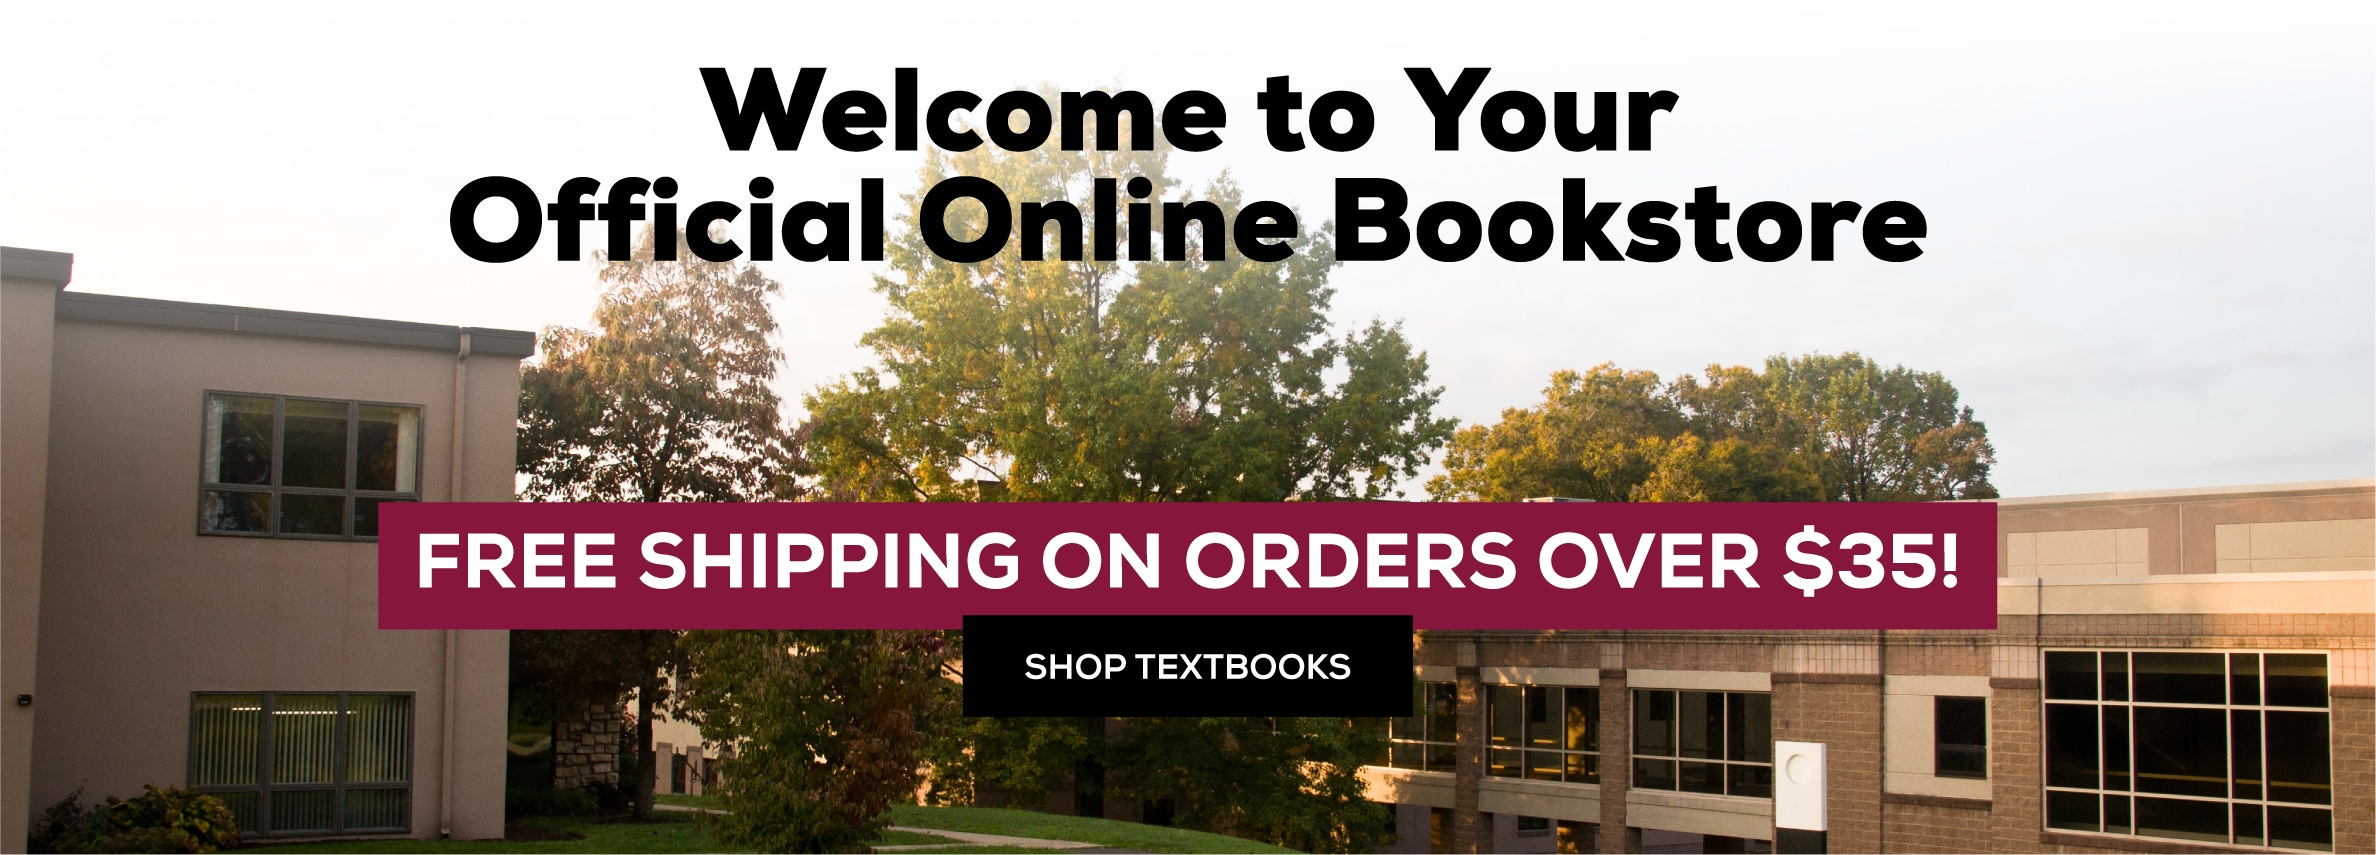 Welcome to your official online bookstore. Free shipping on all orders over $35! Shop textbooks.